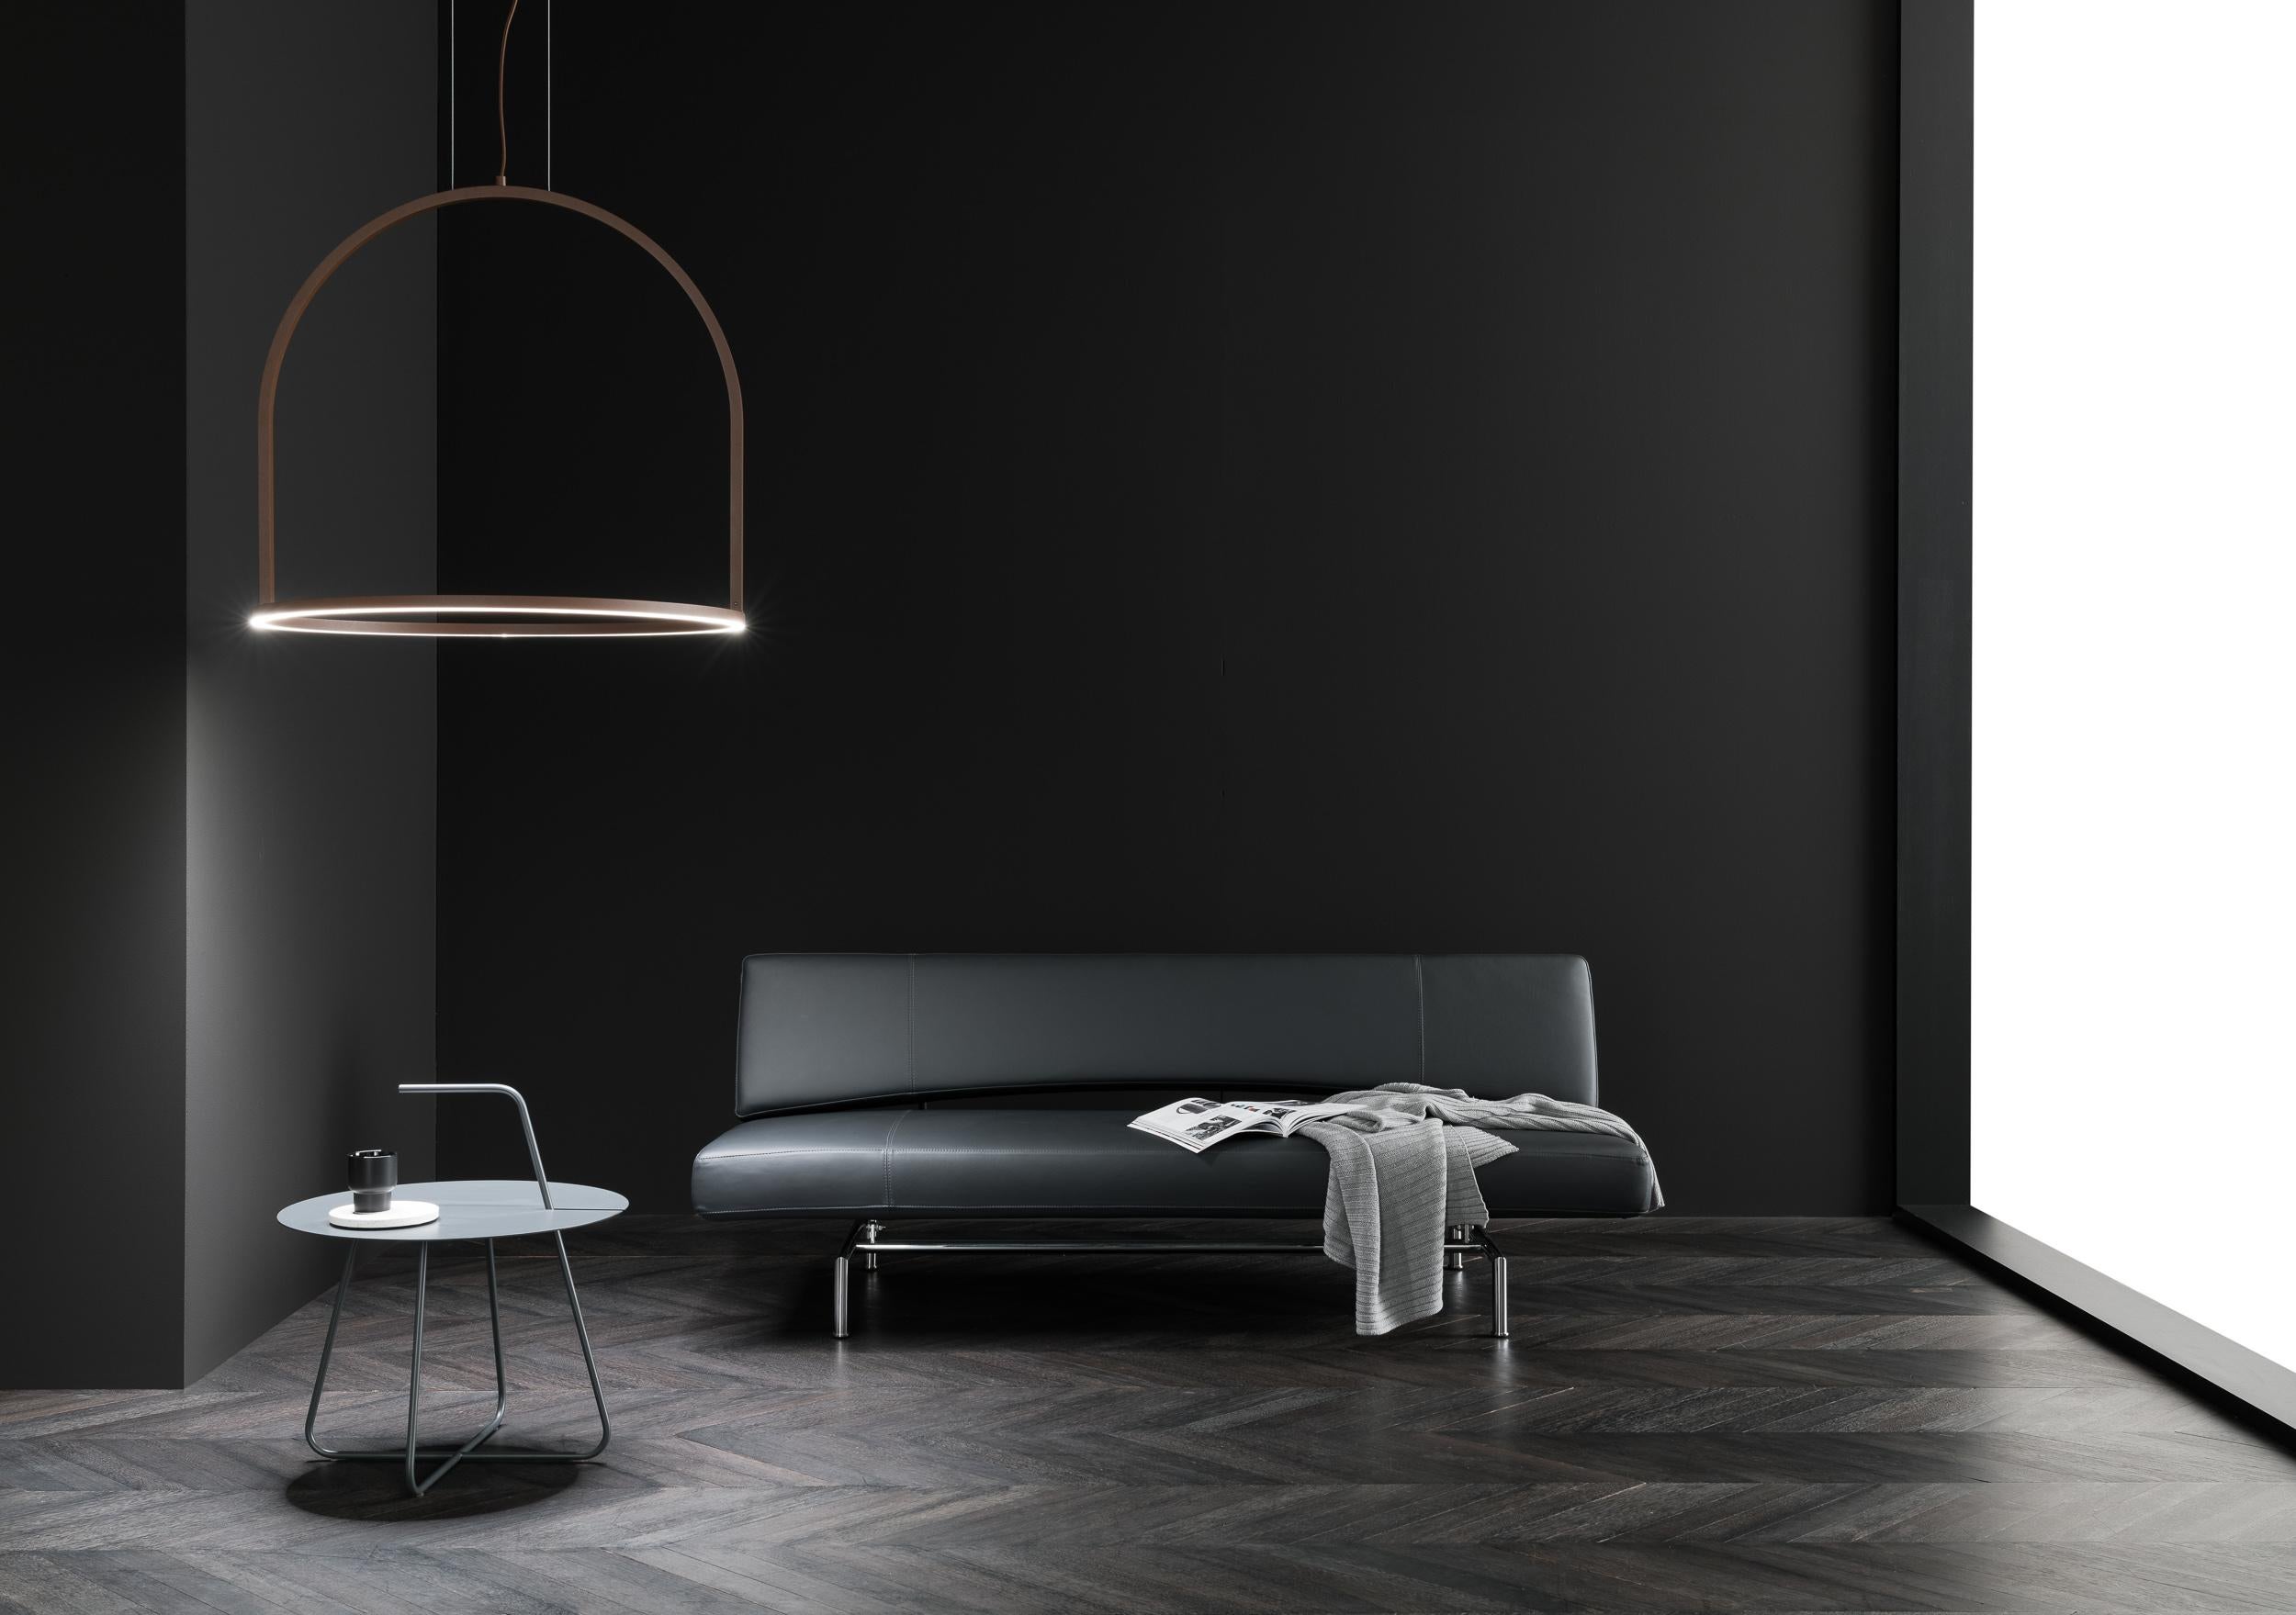 Iconic and high performing, the U-Light collection by Timo Ripatti is a graphic sculpture of circular aluminum elements, minimal and light, that decorate ceilings and walls. Representative of a craftsmanship and cutting-edge technology, all models